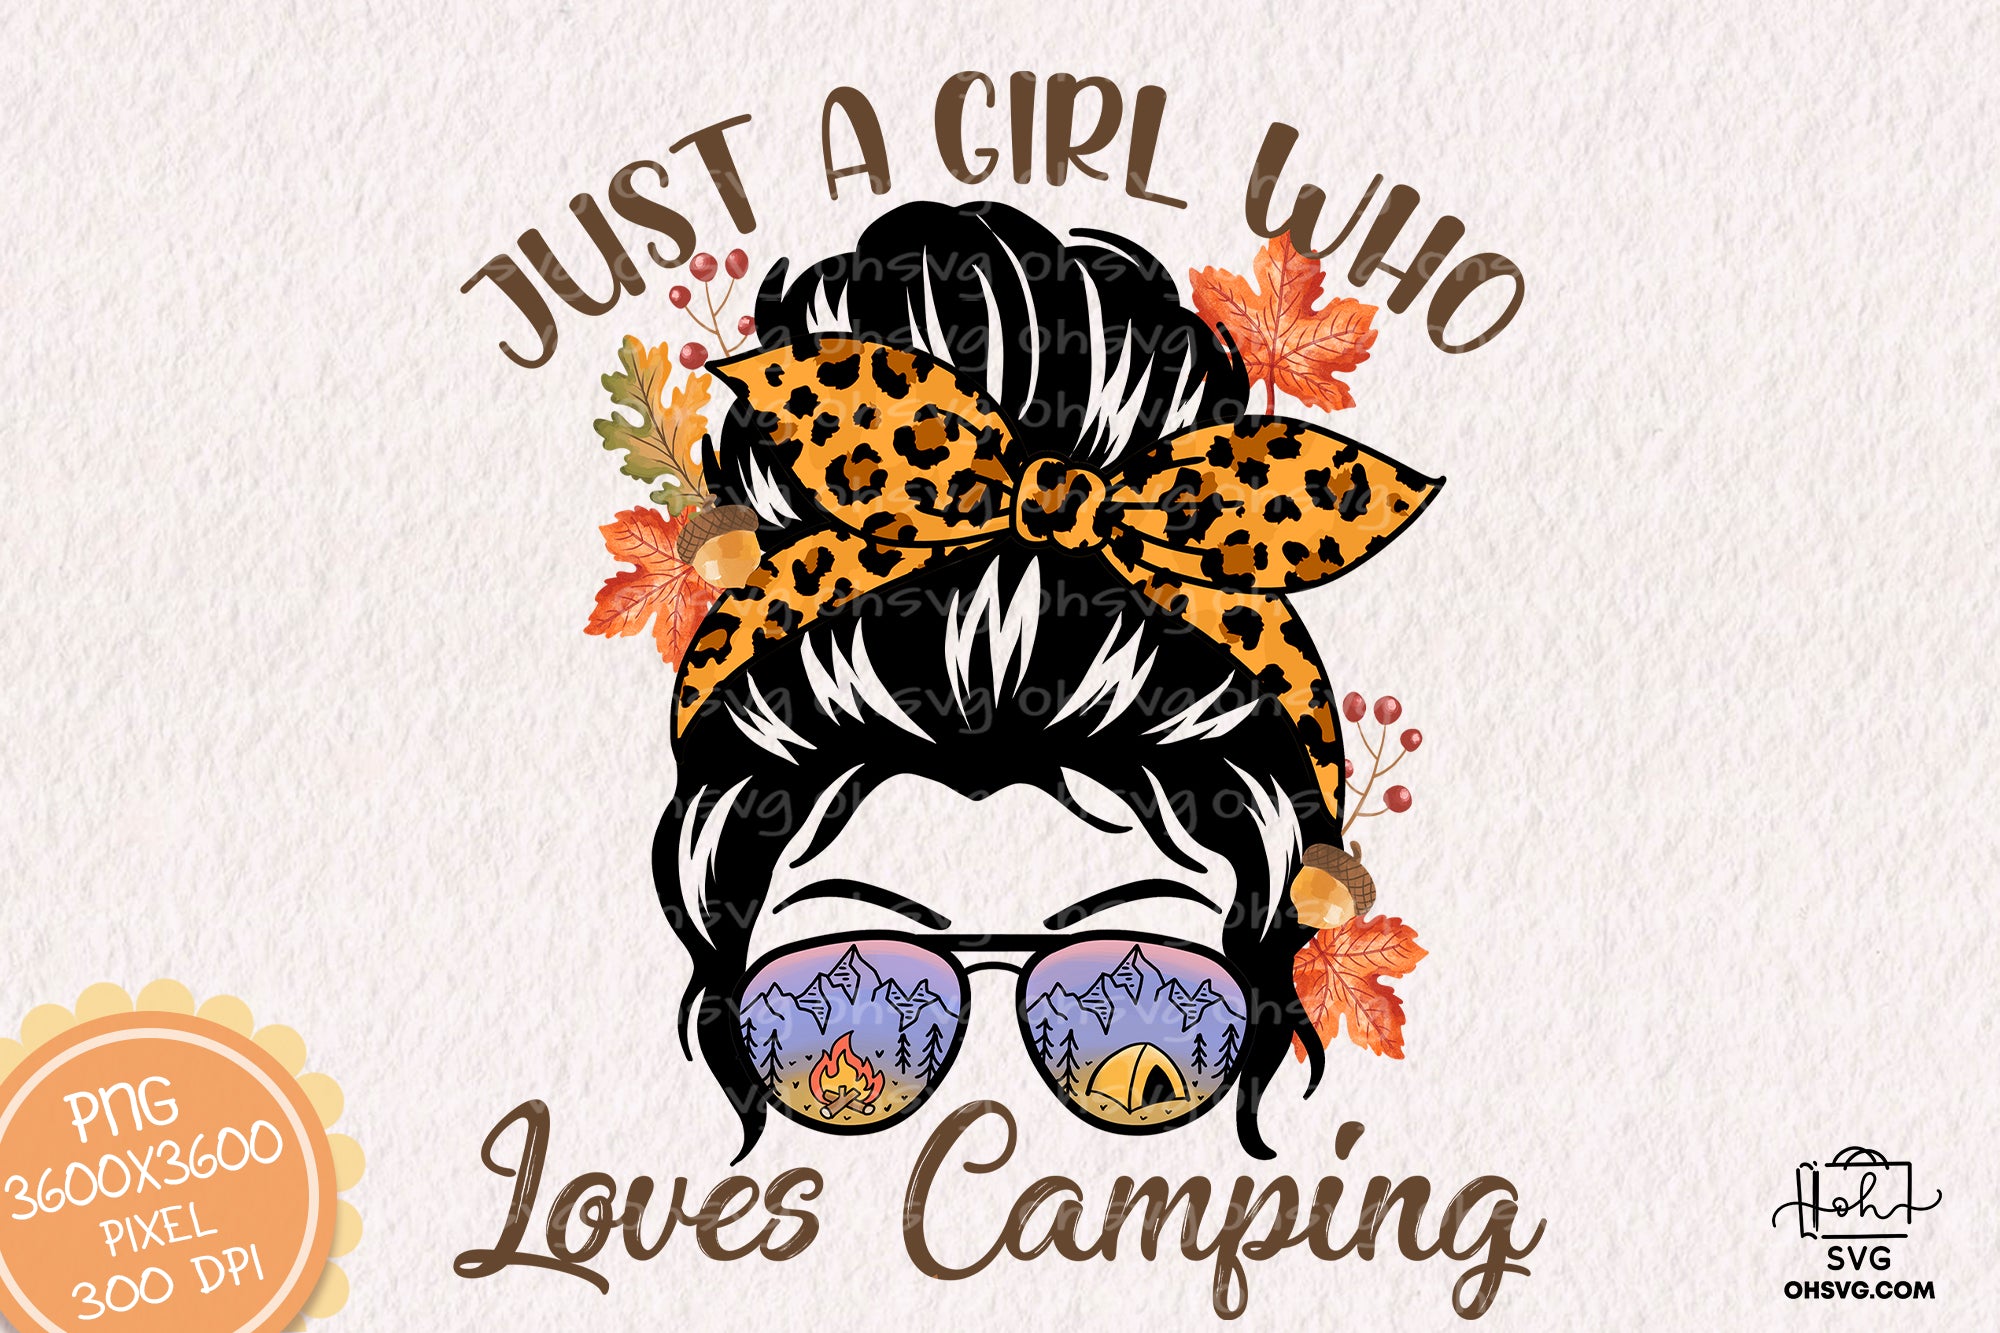 Just A Girl Who Loves Camping Sublimation PNG, Camping Life PNG, Camping Outdoor PNG